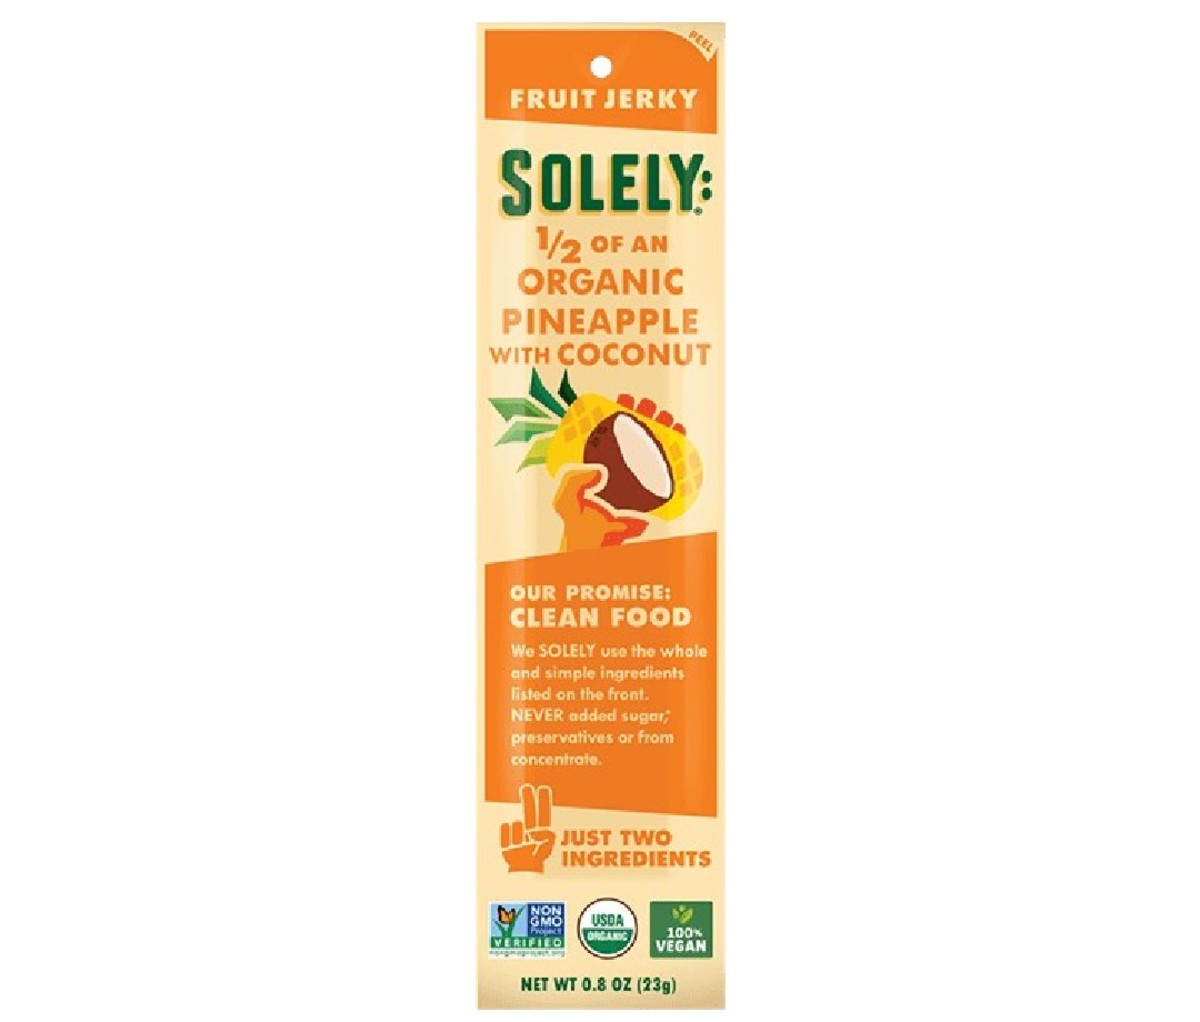 A package with Solely Organic Pineapple with Coconut Fruit Jerky.